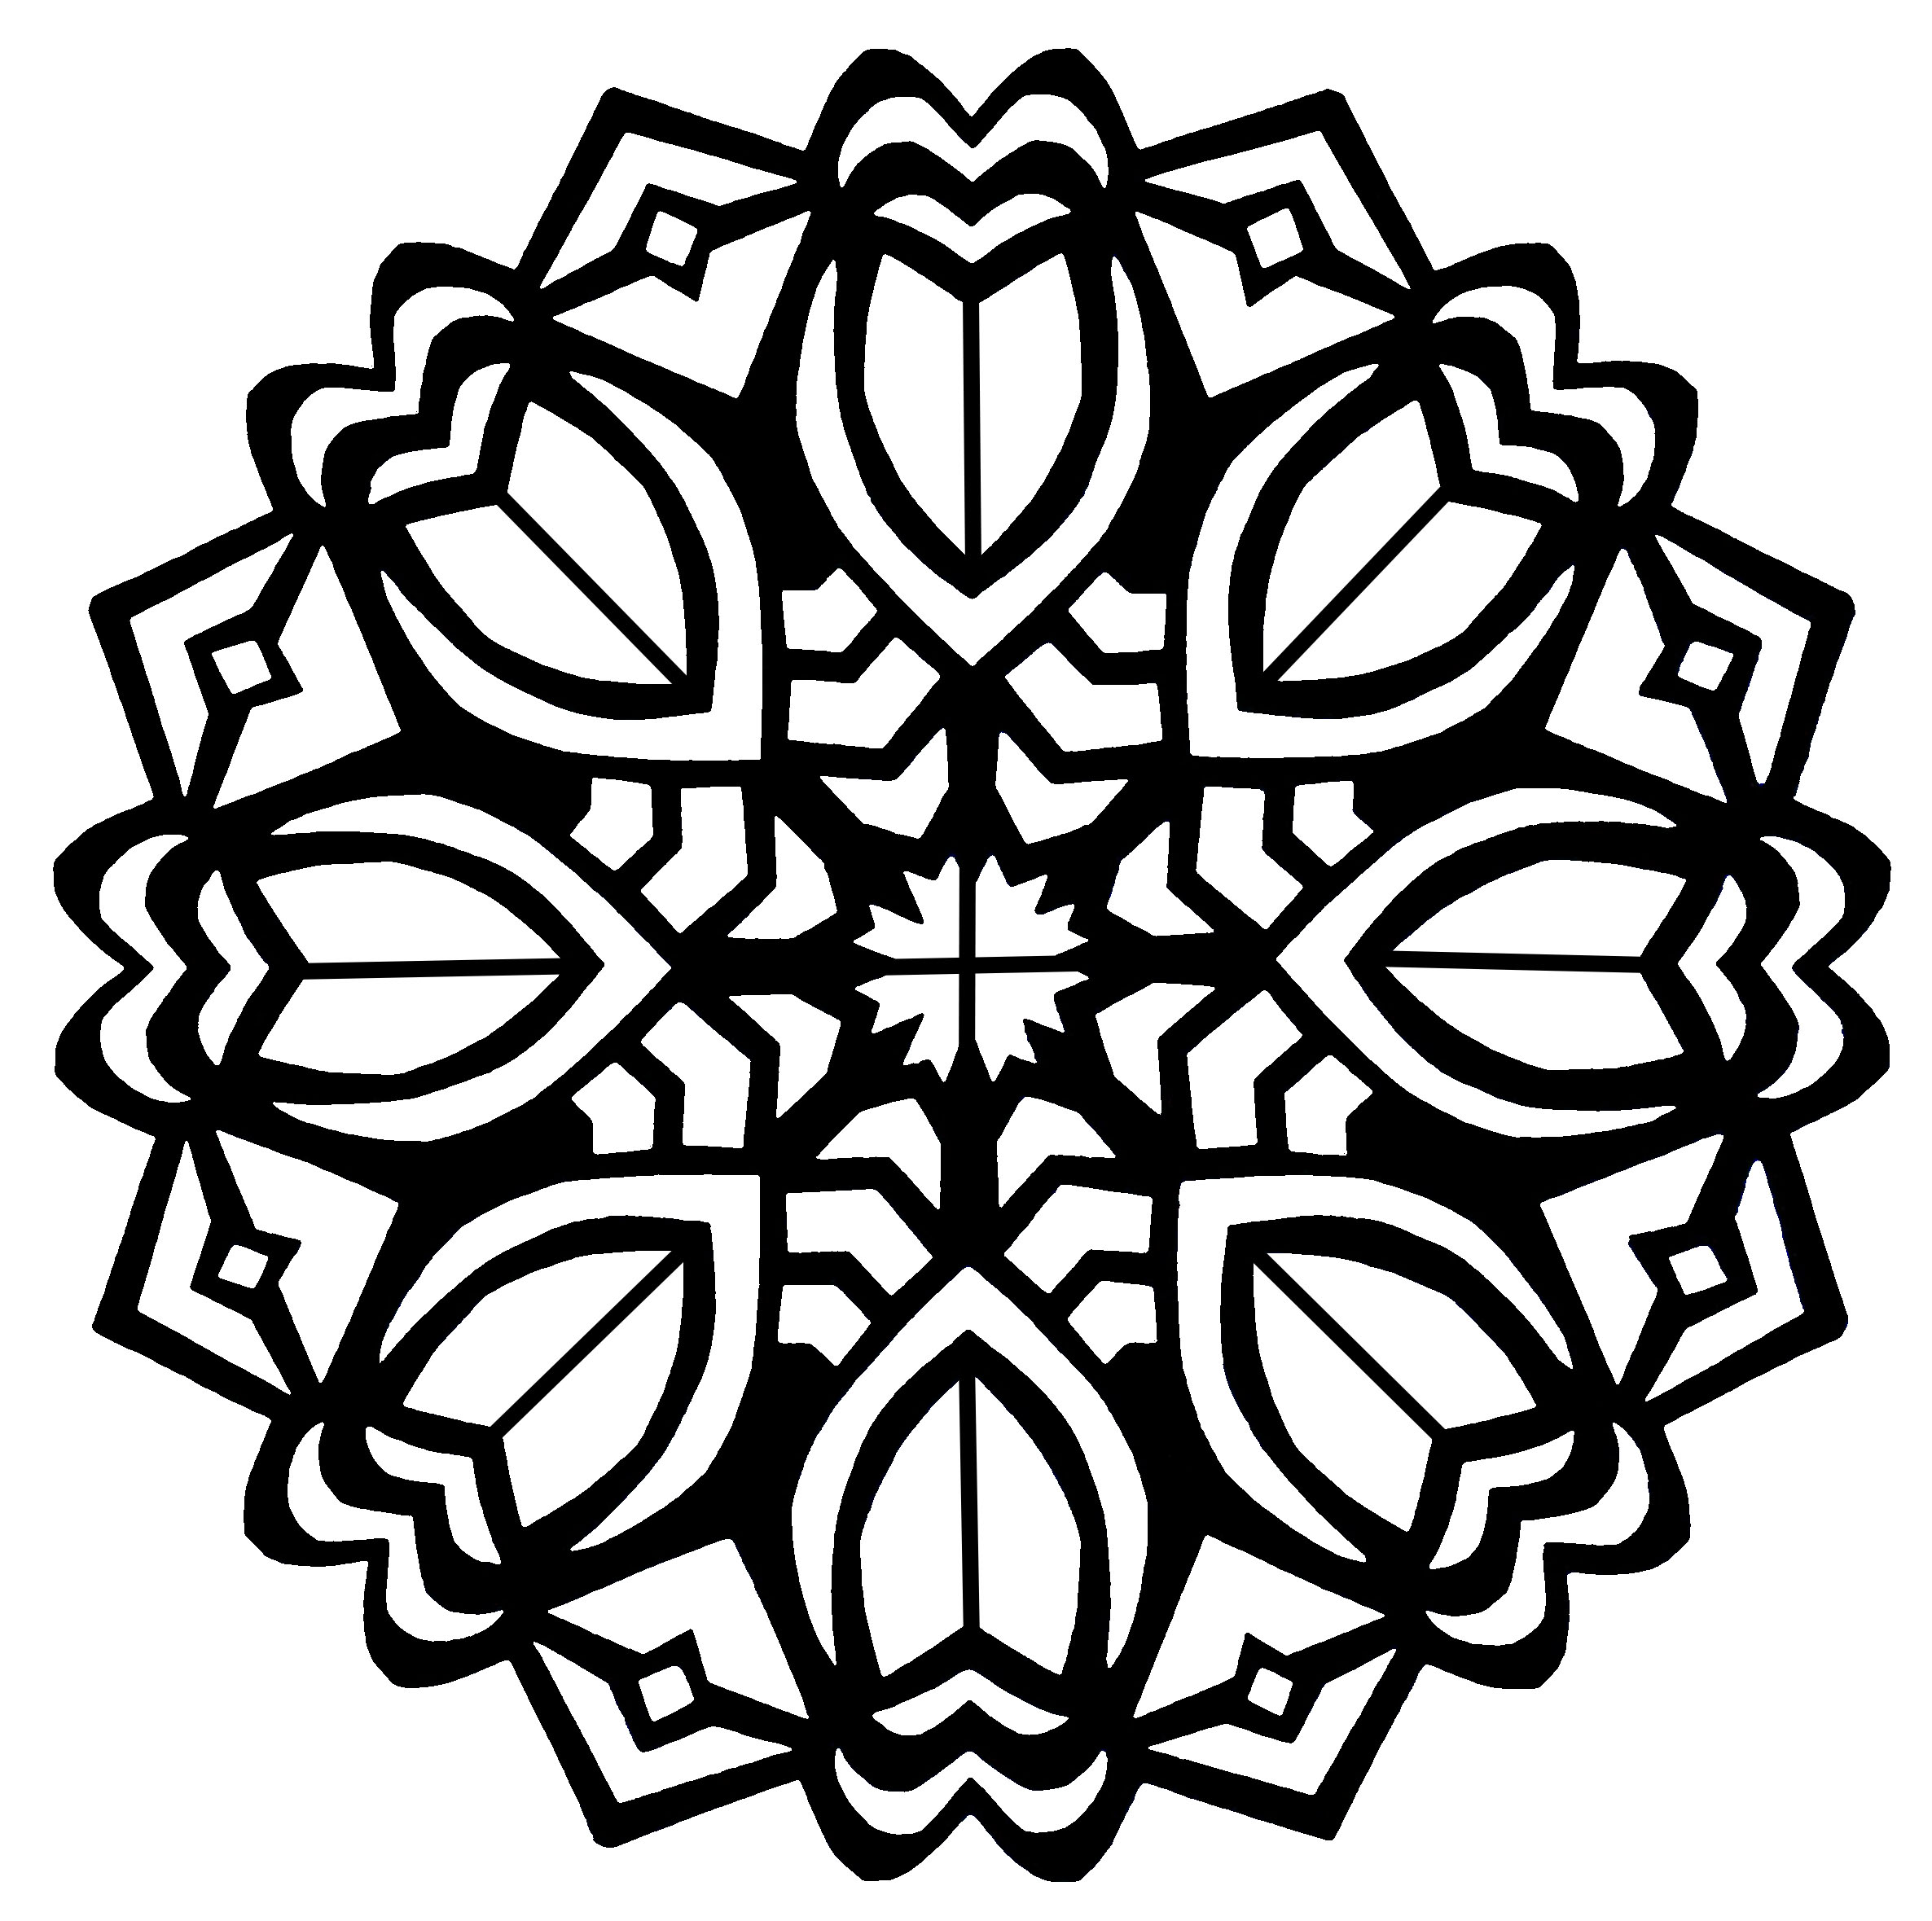 Art Deco Flowers, forming an exclusive Mandala